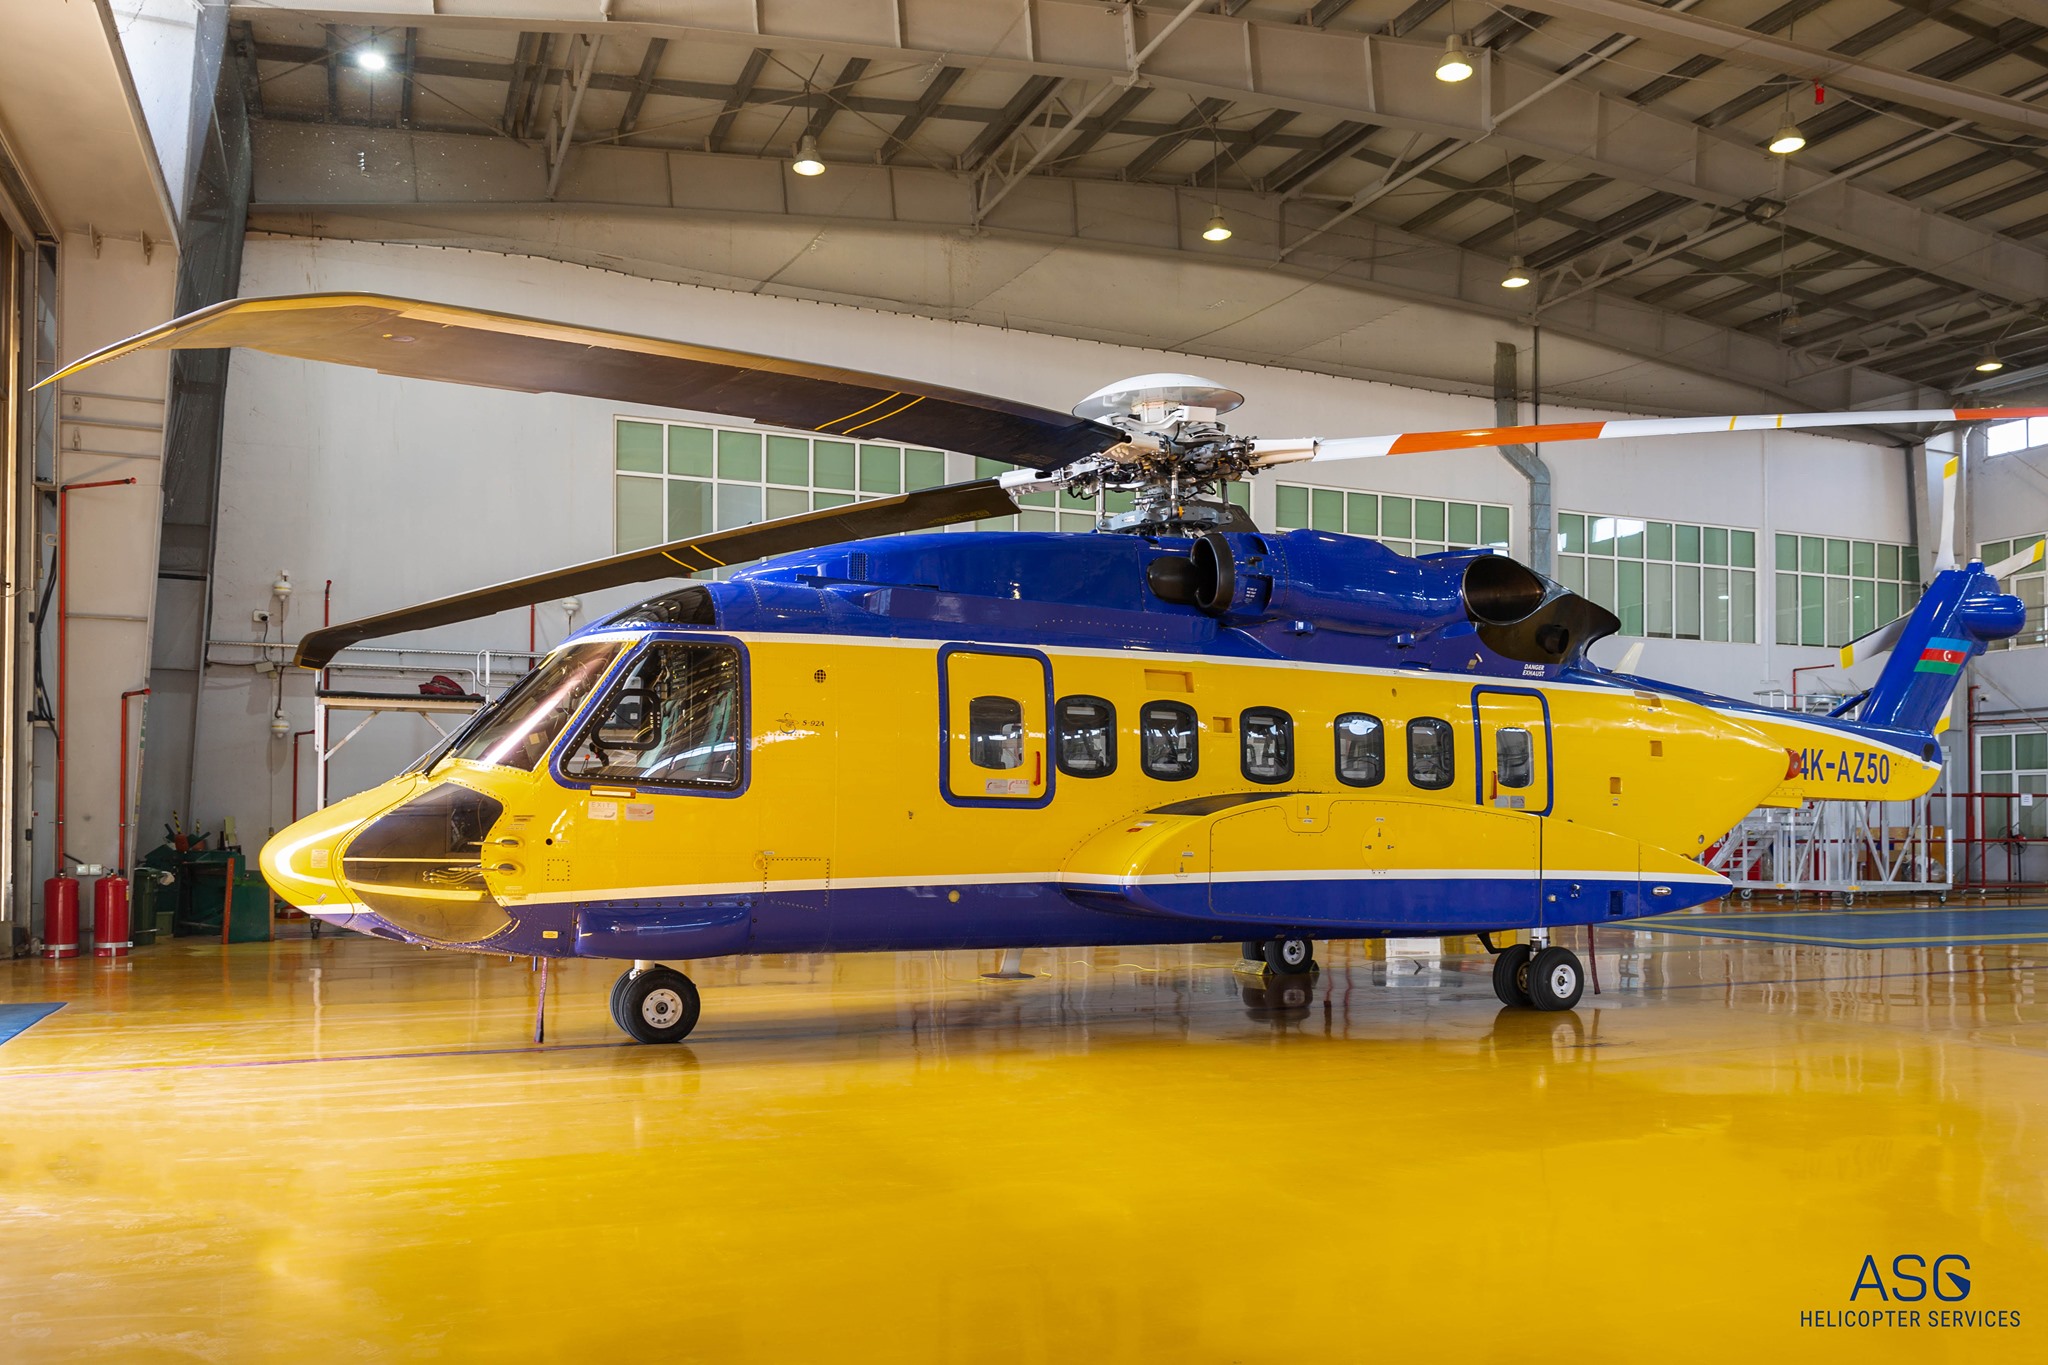 The leading helicopter service provider in the Caspian region, is pleased to announce that it has successfully completed another flare tip change out for its customer BP AGT